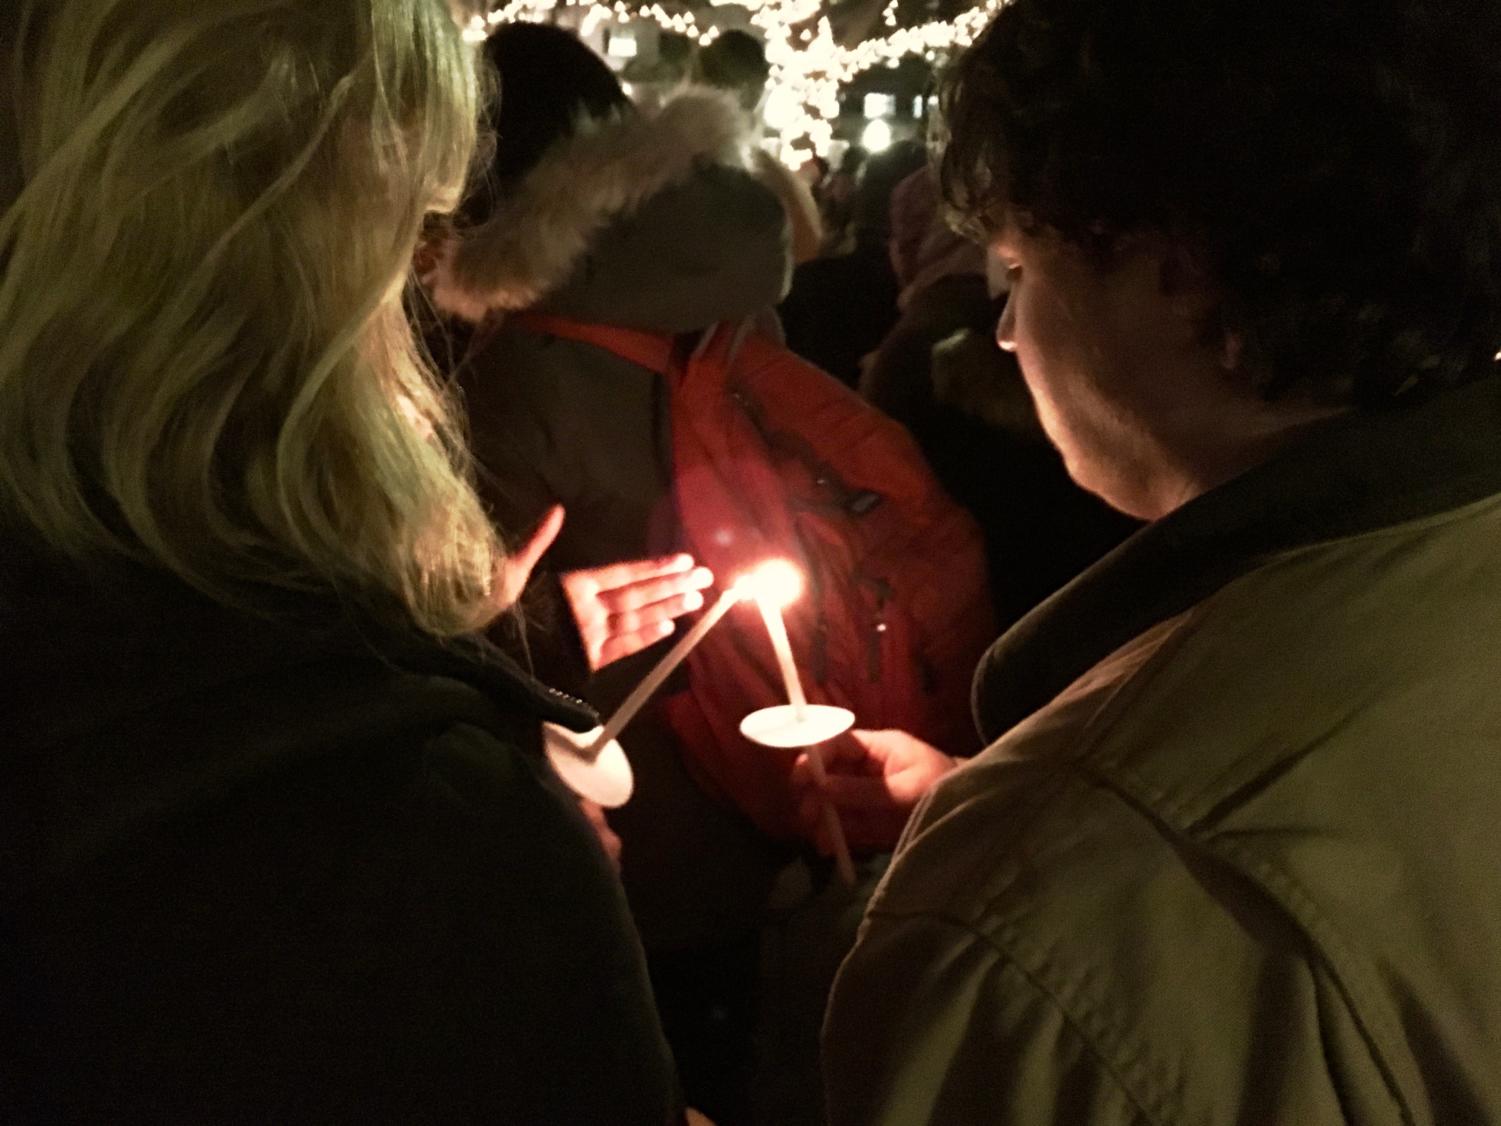 Students lit candles in memory of the Quebec City massacre victims.